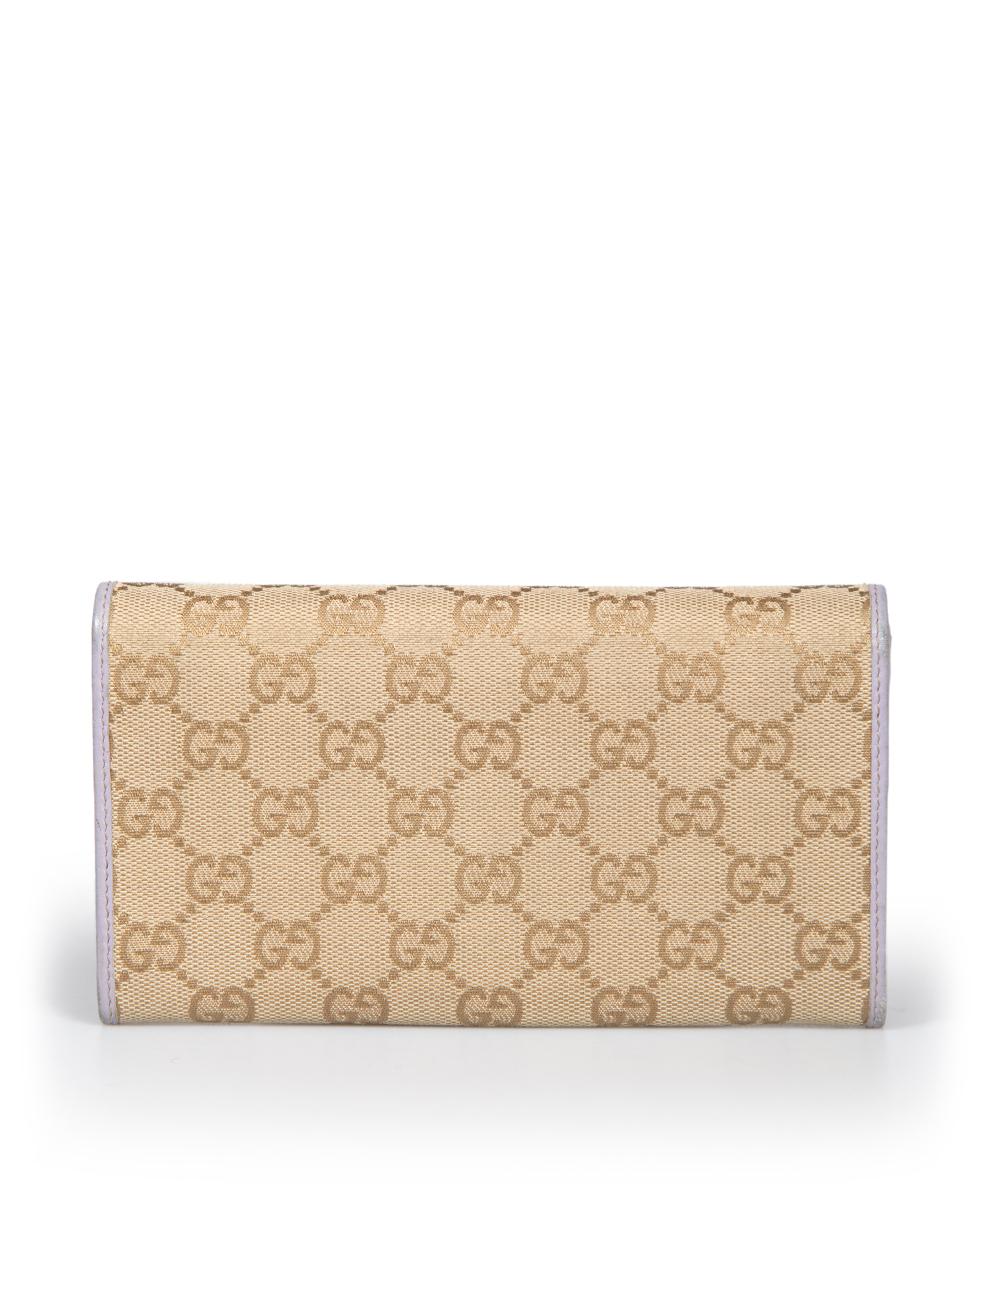 Gucci Beige GG Plus Monogram Joy Continental Flap Wallet In Excellent Condition For Sale In London, GB